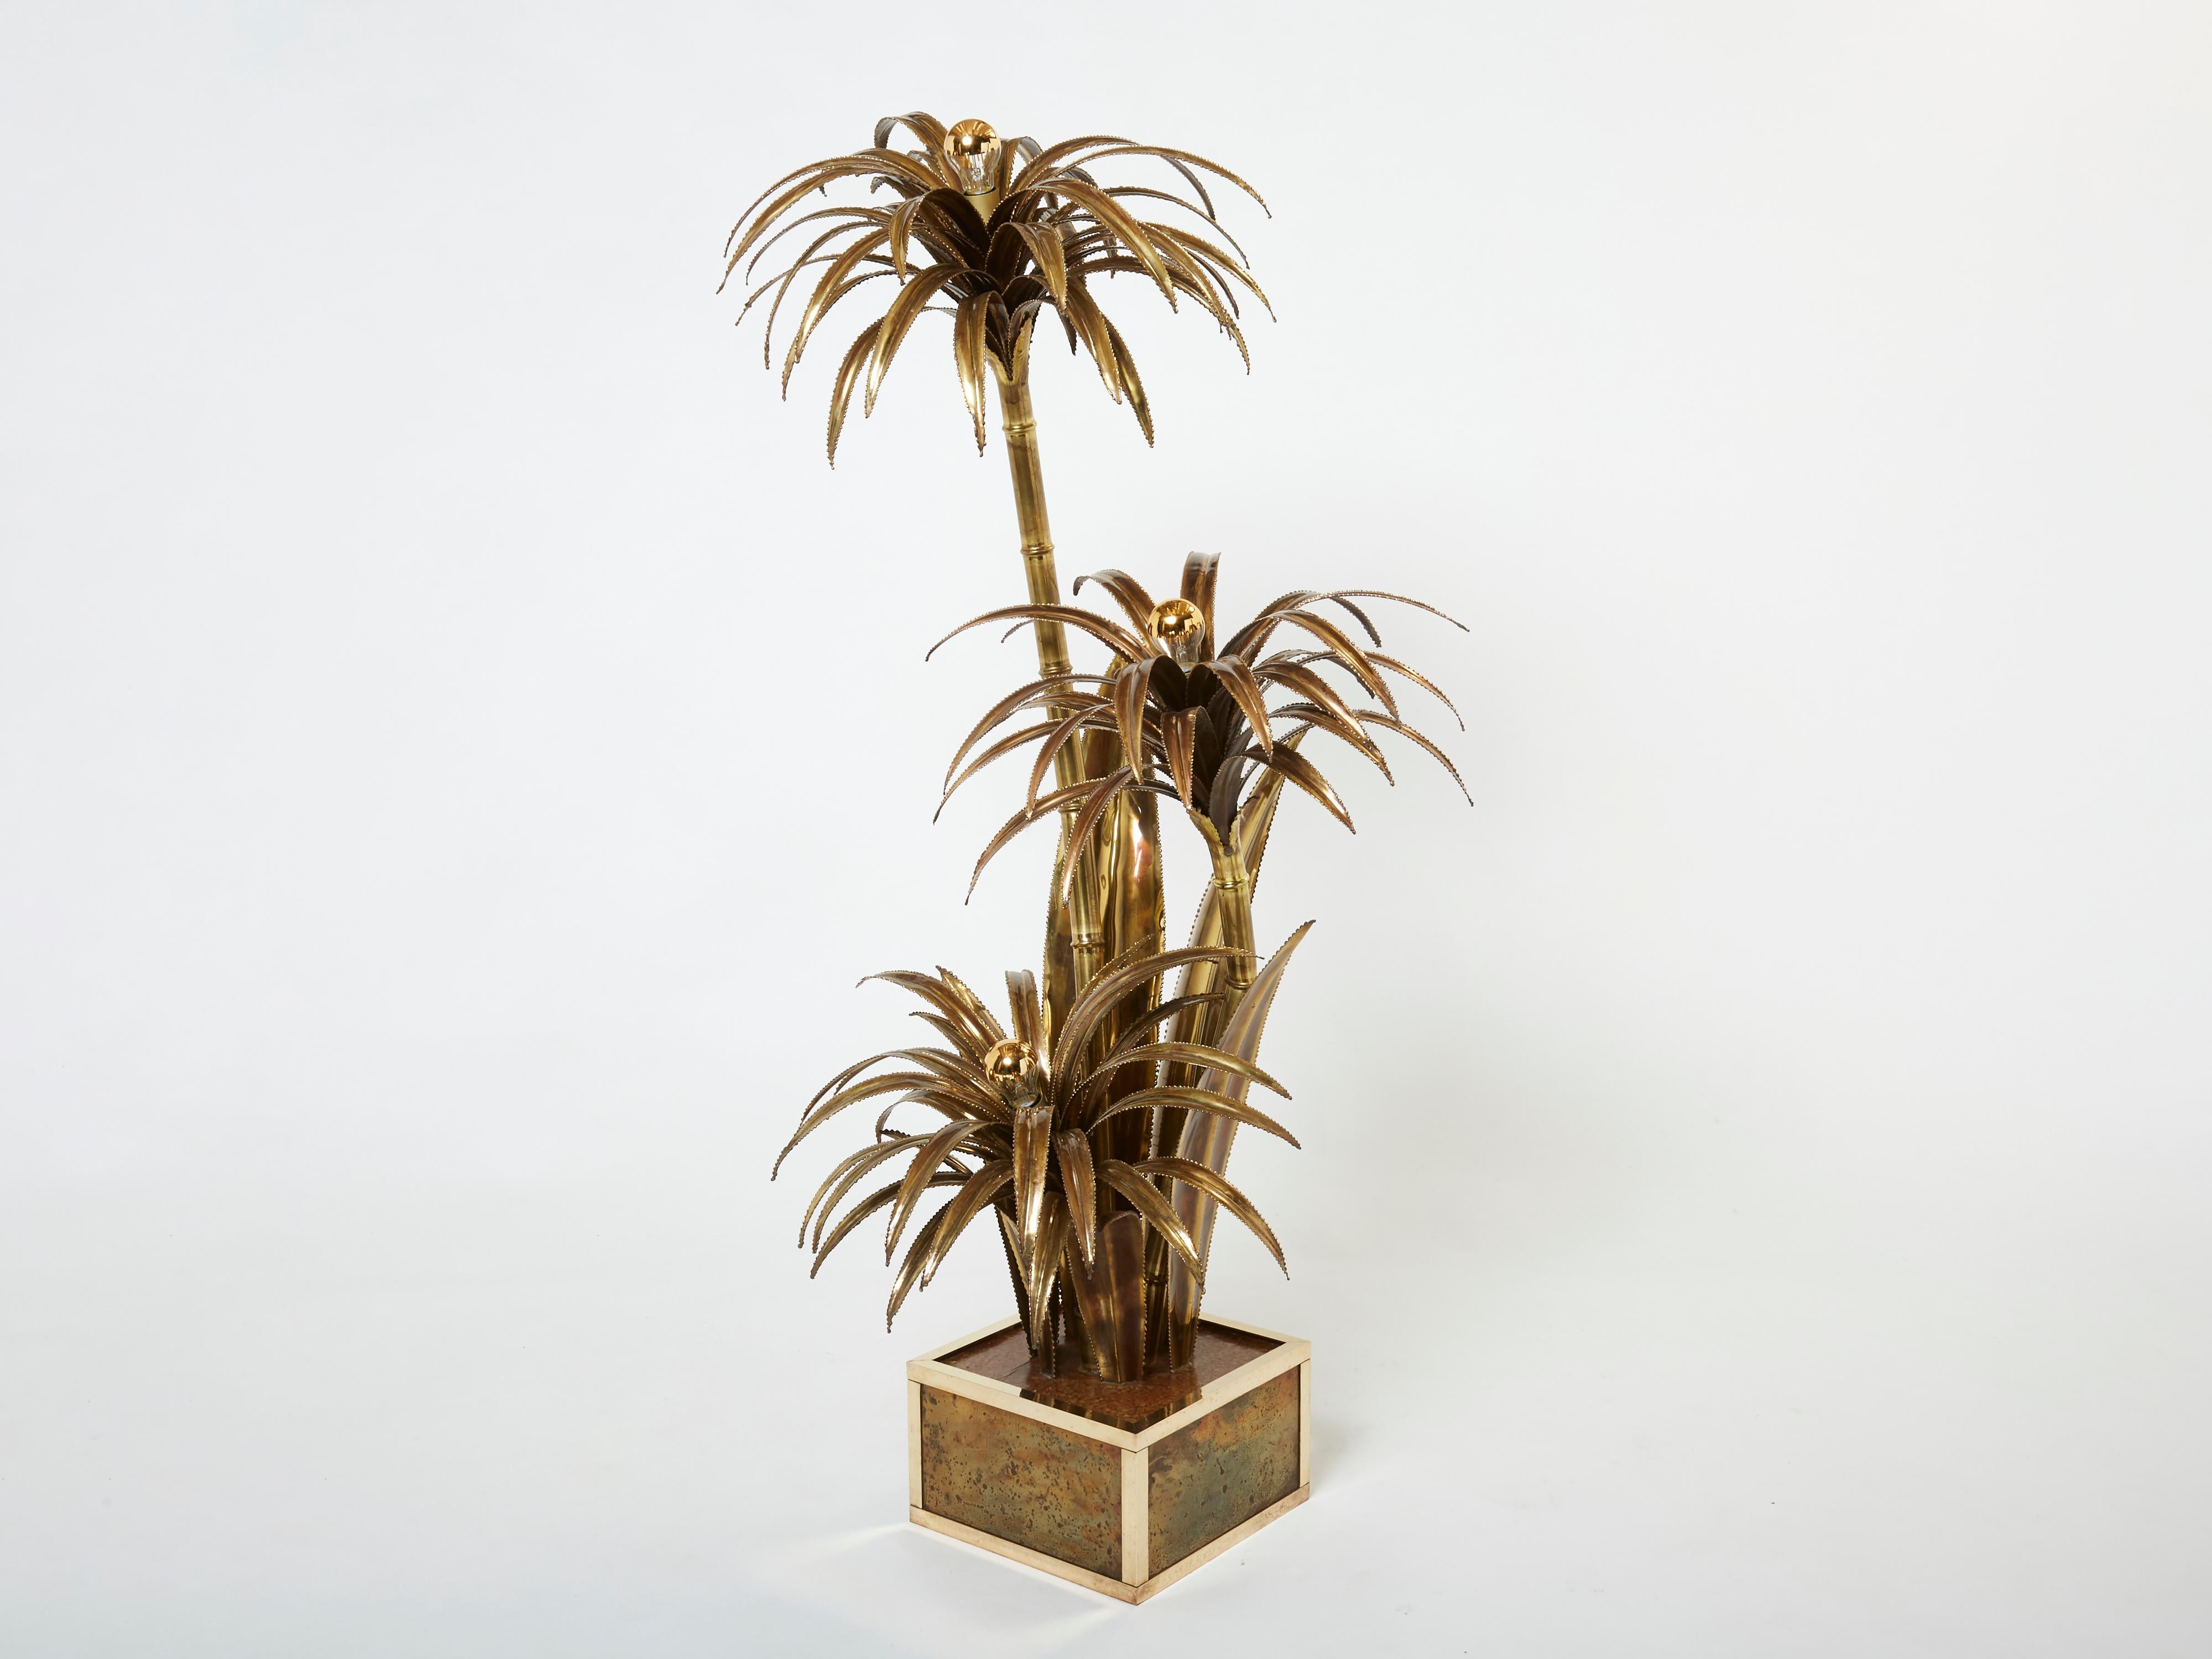 These palm tree floor lamps are one of the most iconic pieces by French design firm Maison Jansen. This rare example is made largely from bright brass, which gives it an air of high-end glamour. But what makes the Jansen palm tree pieces most